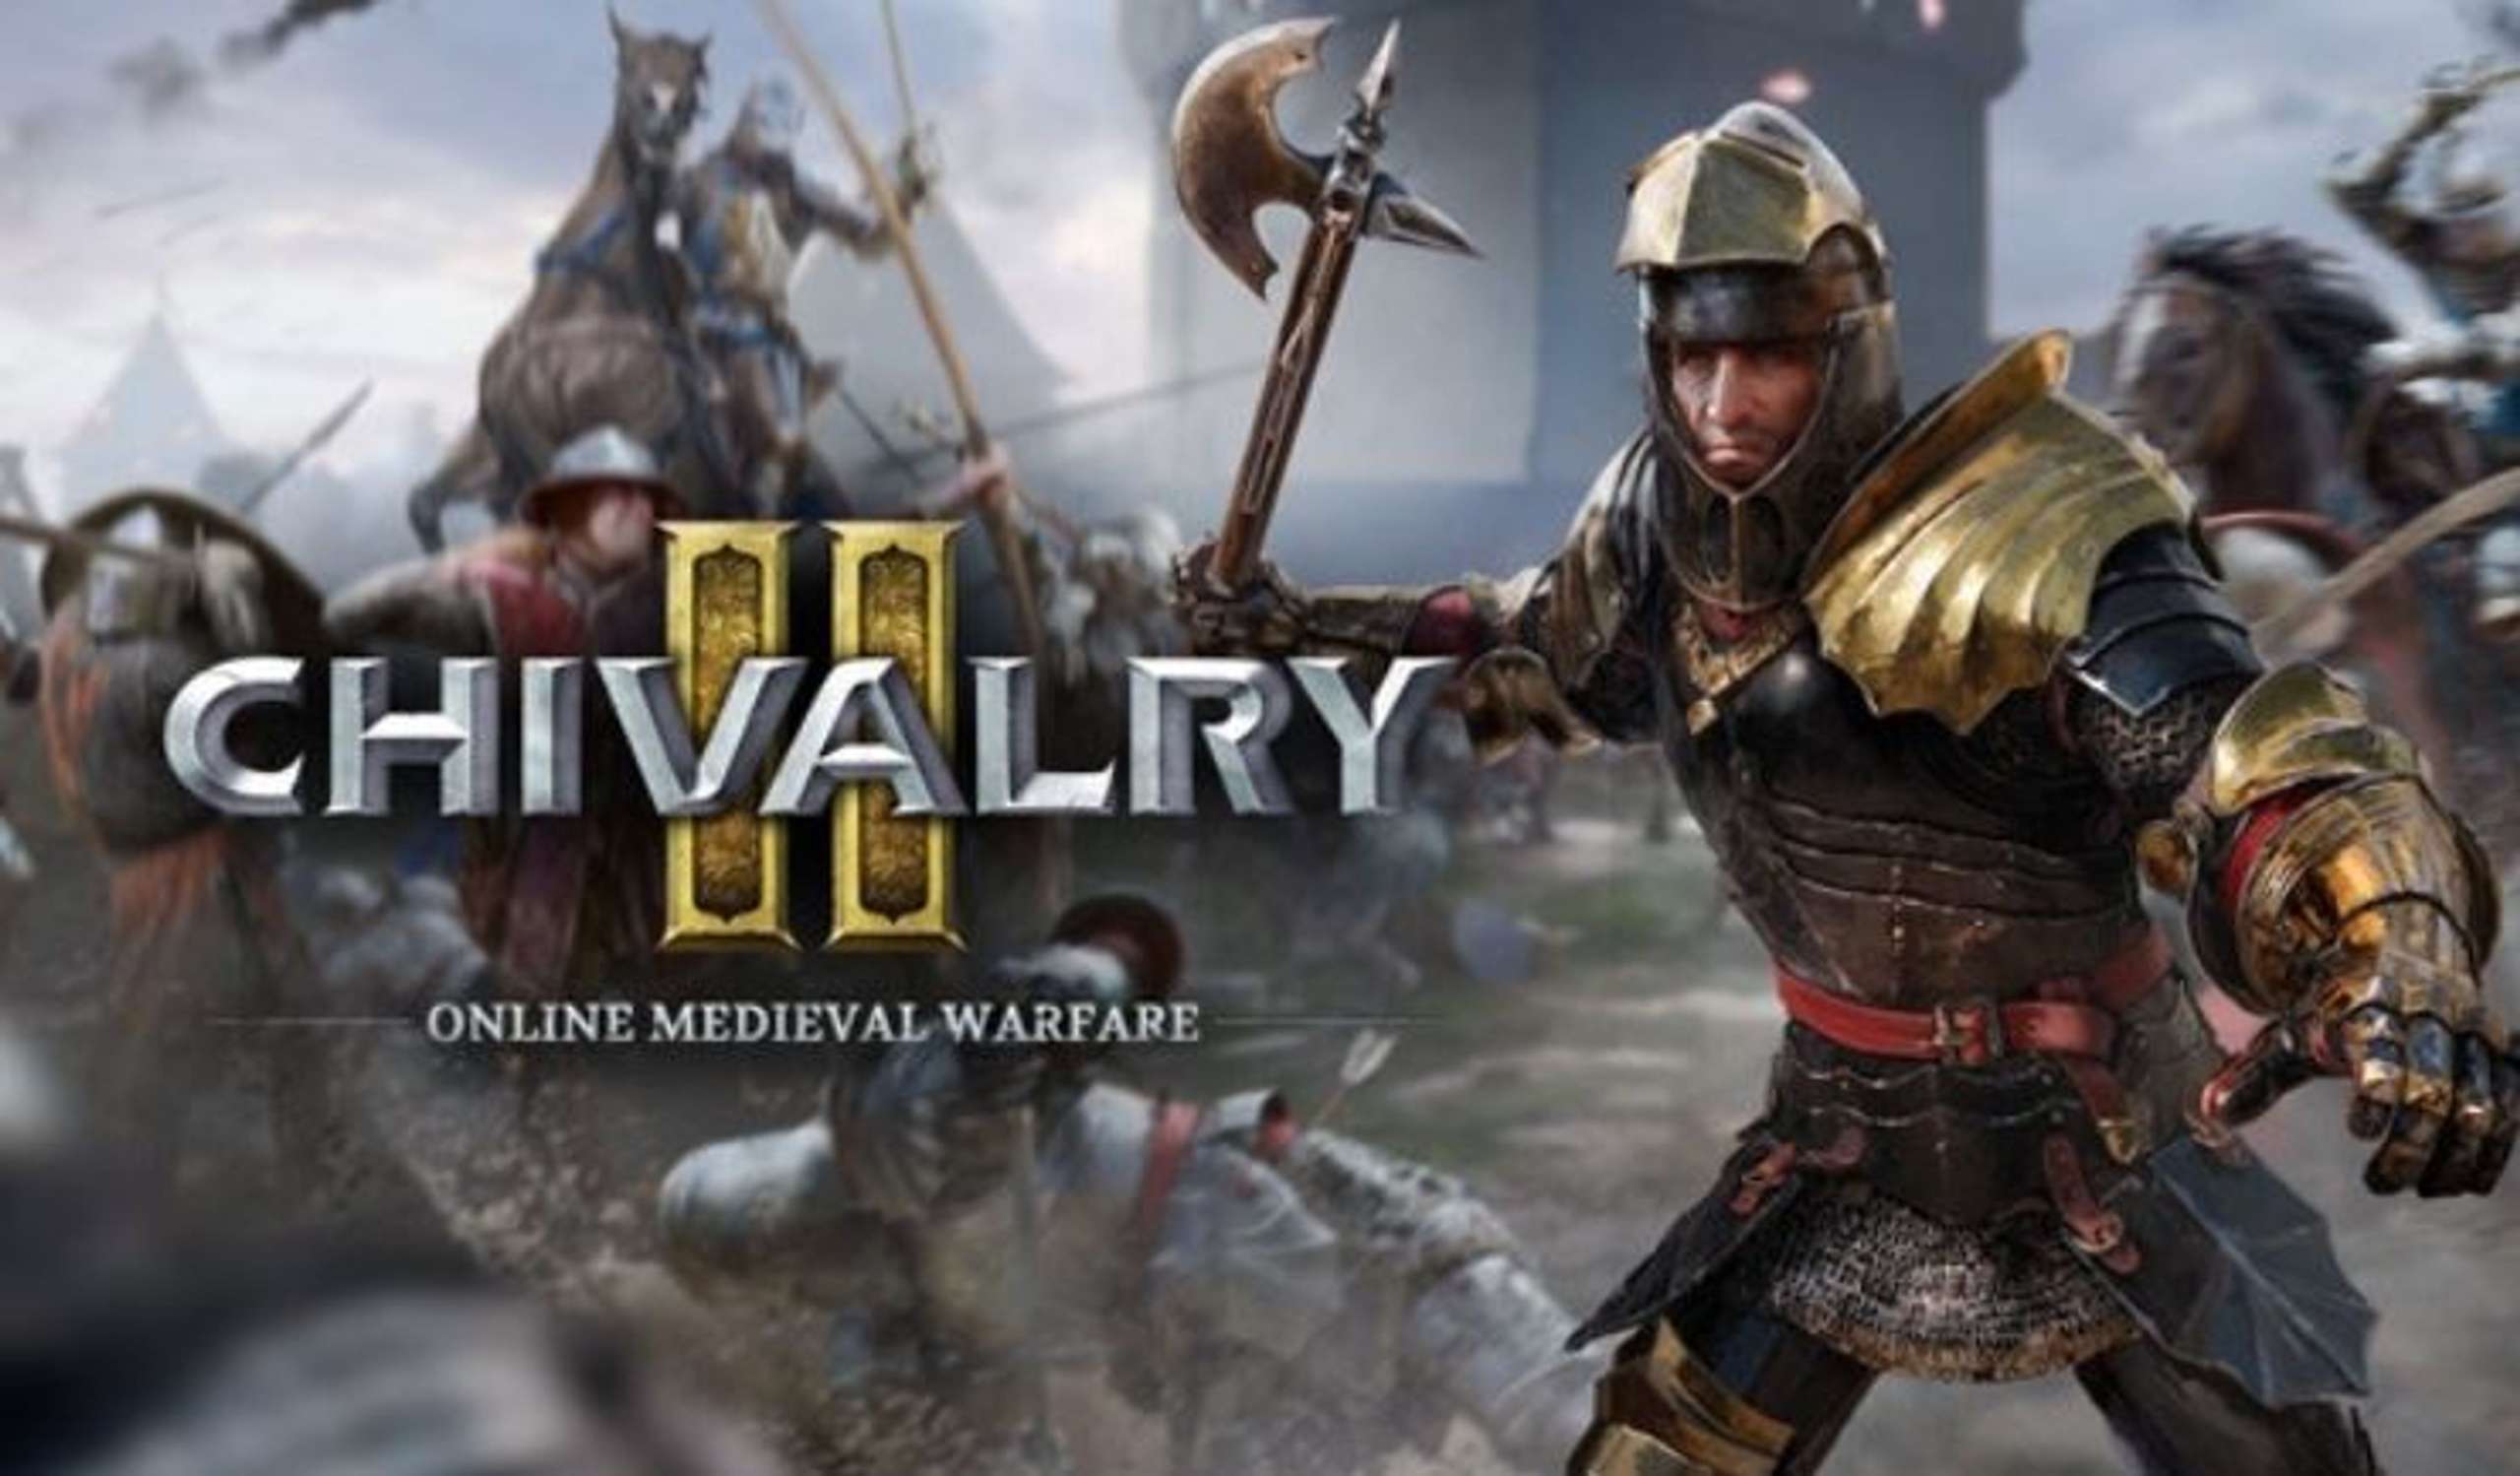 The Authors Of The Medieval Slasher Chivalry 2 Boasted Sales And Discussed Plans For The Game’s Further Development